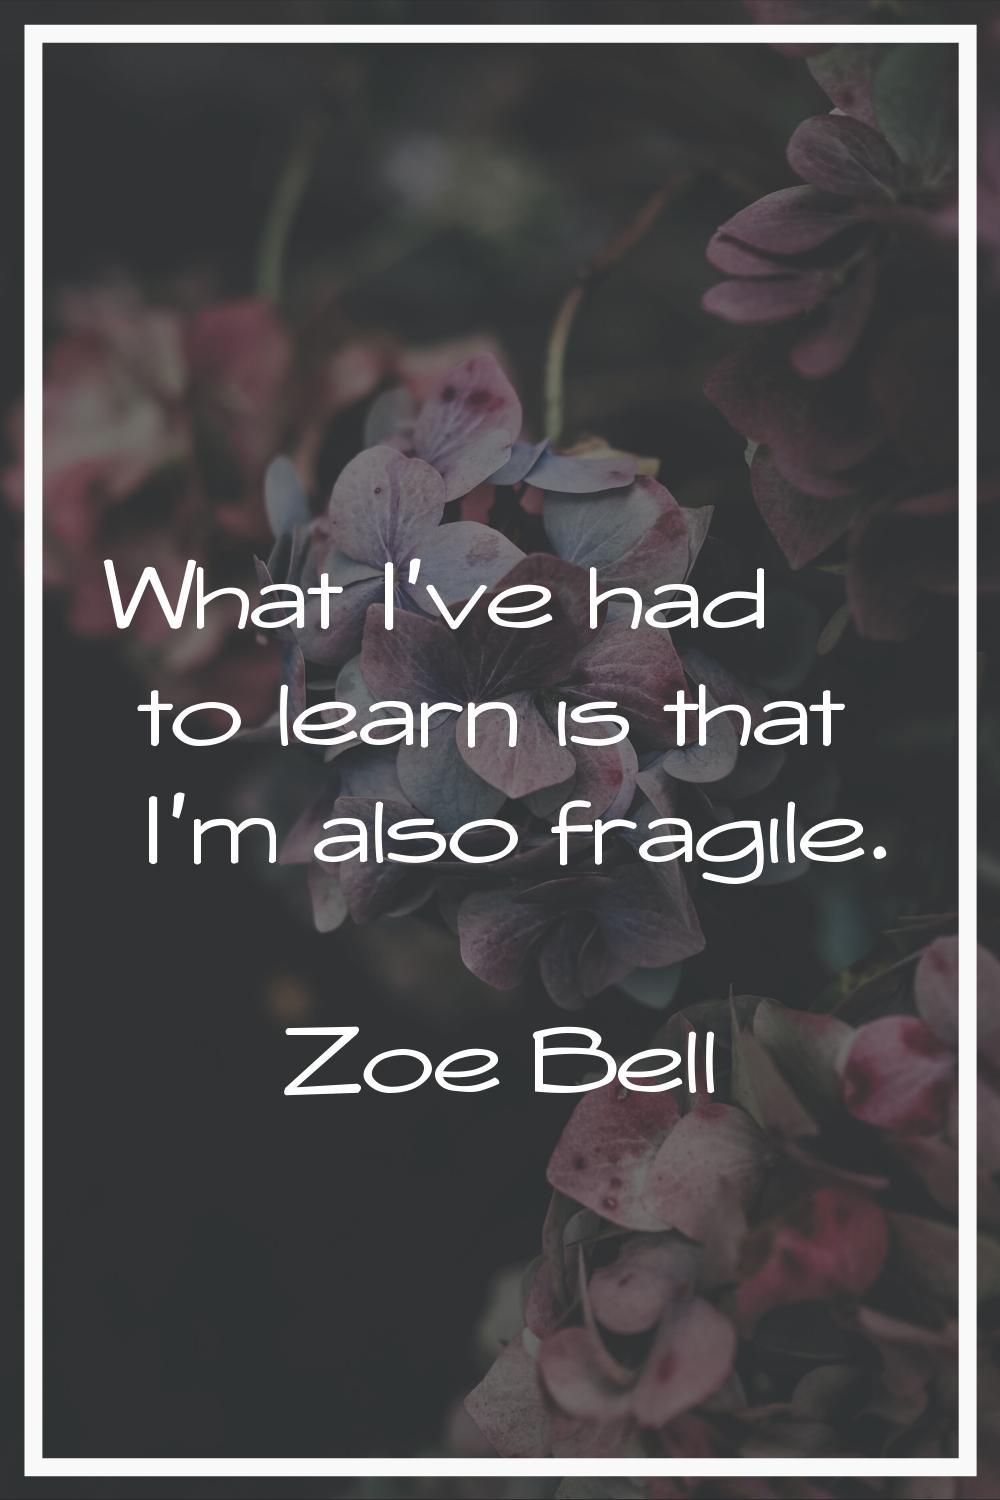 What I've had to learn is that I'm also fragile.